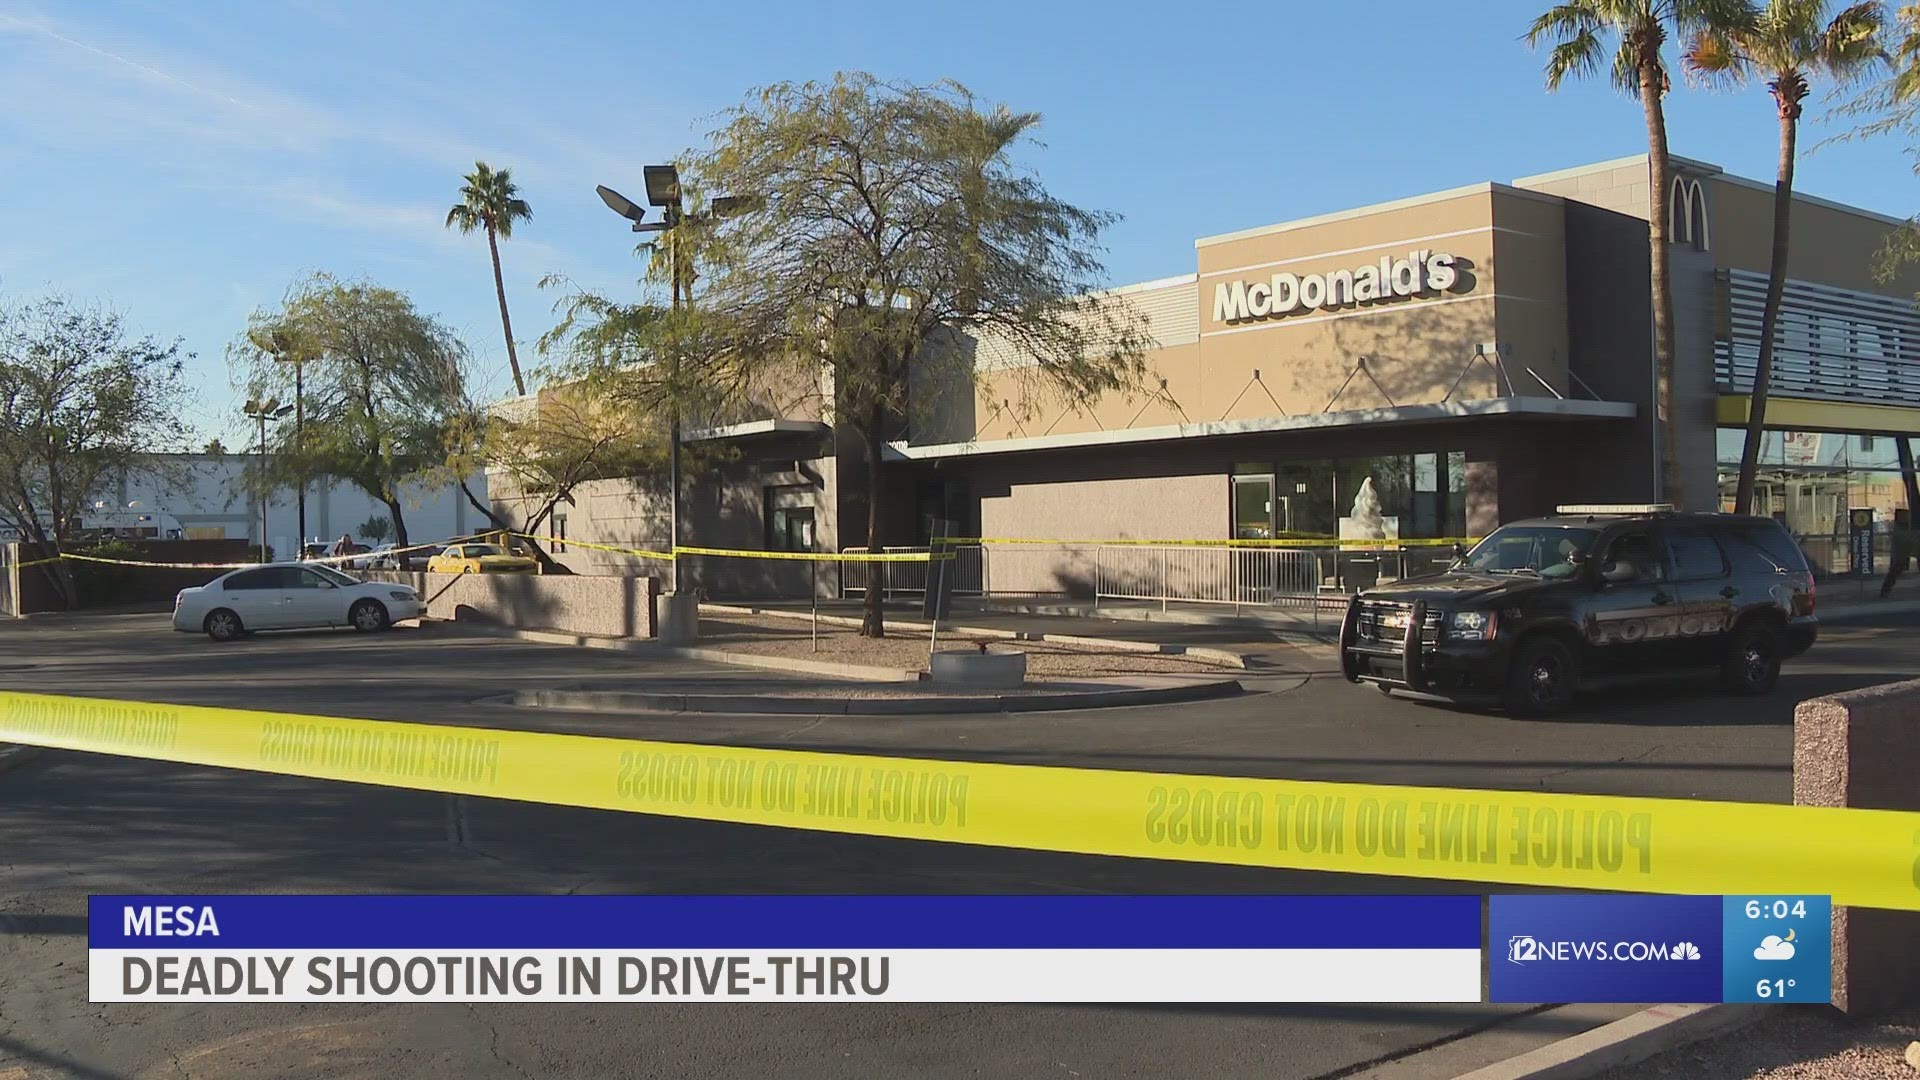 The shooting happened early Saturday morning at a McDonald's in Mesa. Watch the video above for the latest details on what led up to the shooting.